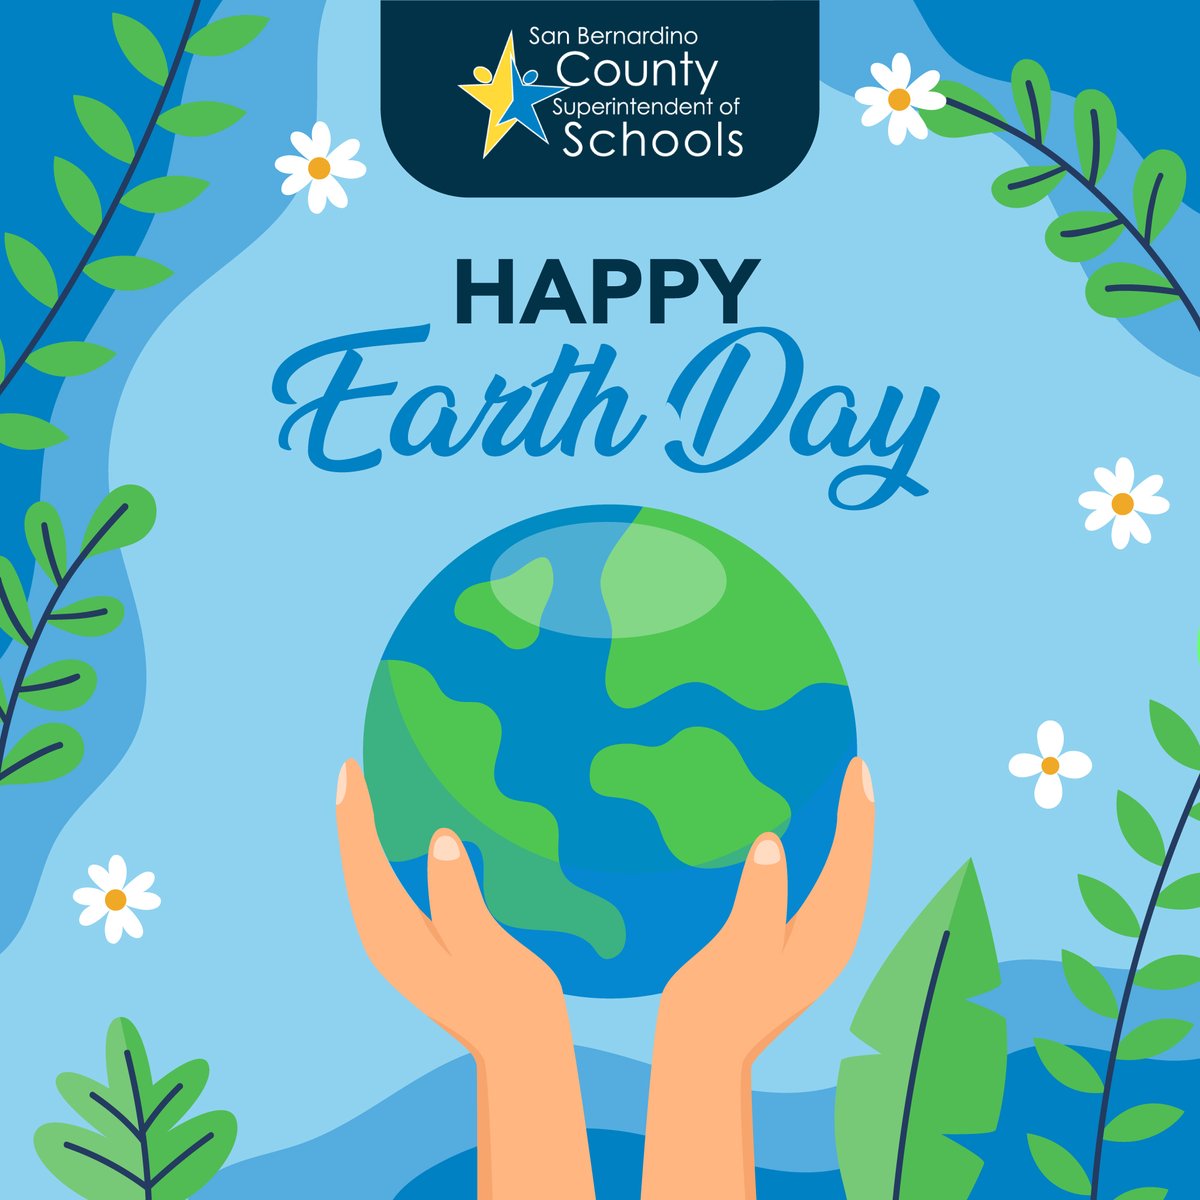 Happy Earth Day! Let's cherish our beautiful planet today and every day. Together, we can make a difference by protecting nature, reducing waste and promoting sustainability. #TransformingLives